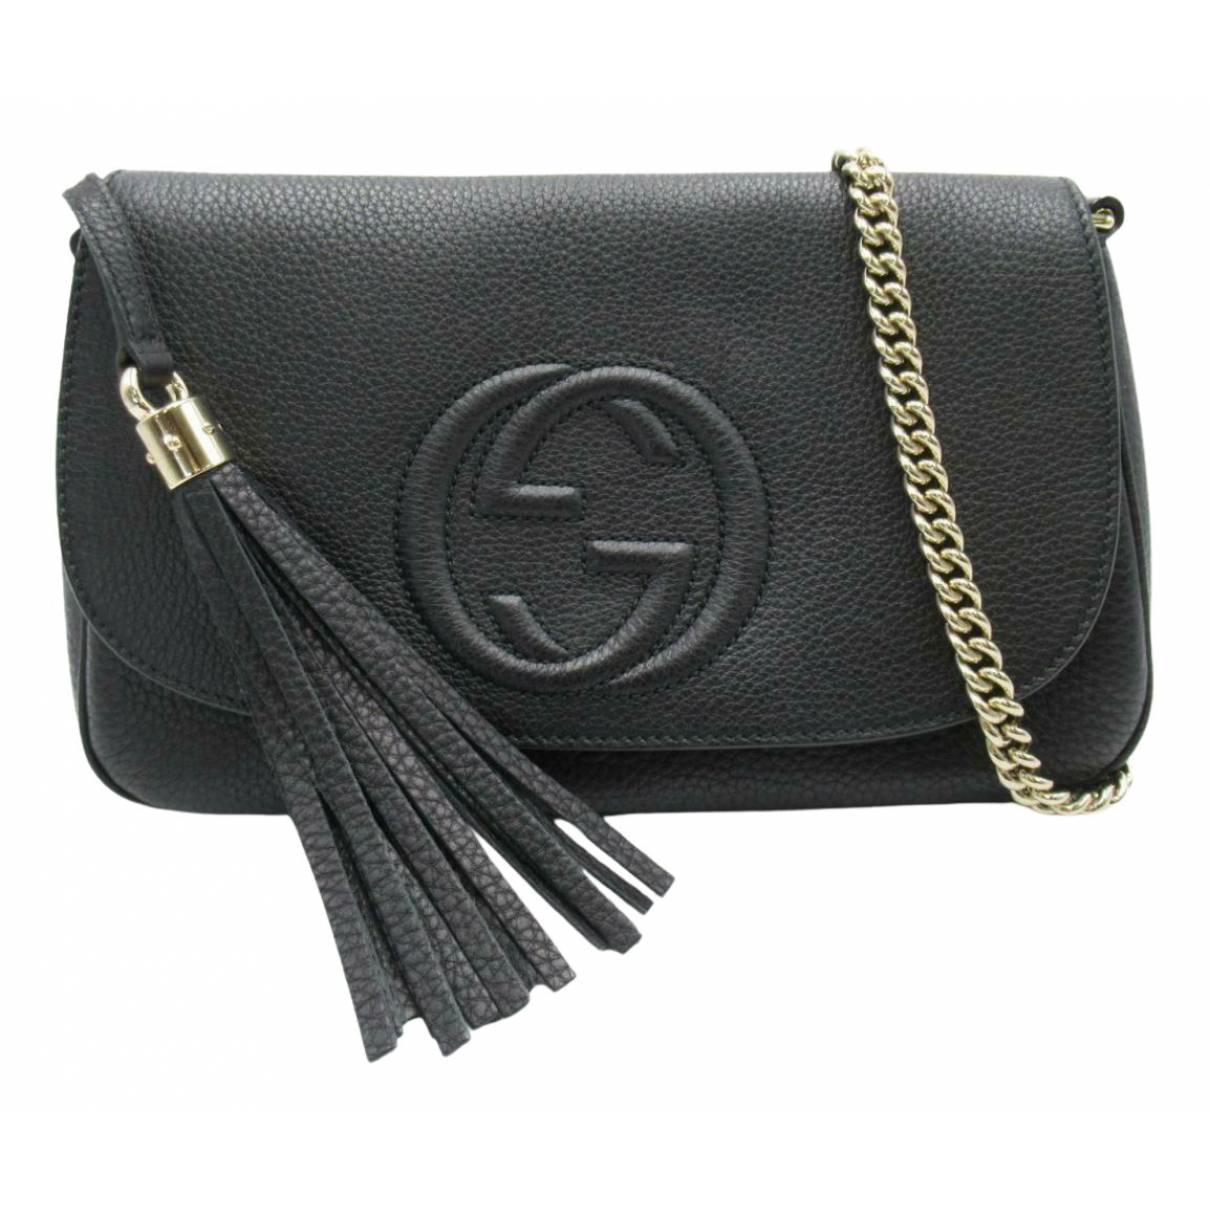 Soho long flap leather crossbody bag Gucci Black in Leather - 14784215